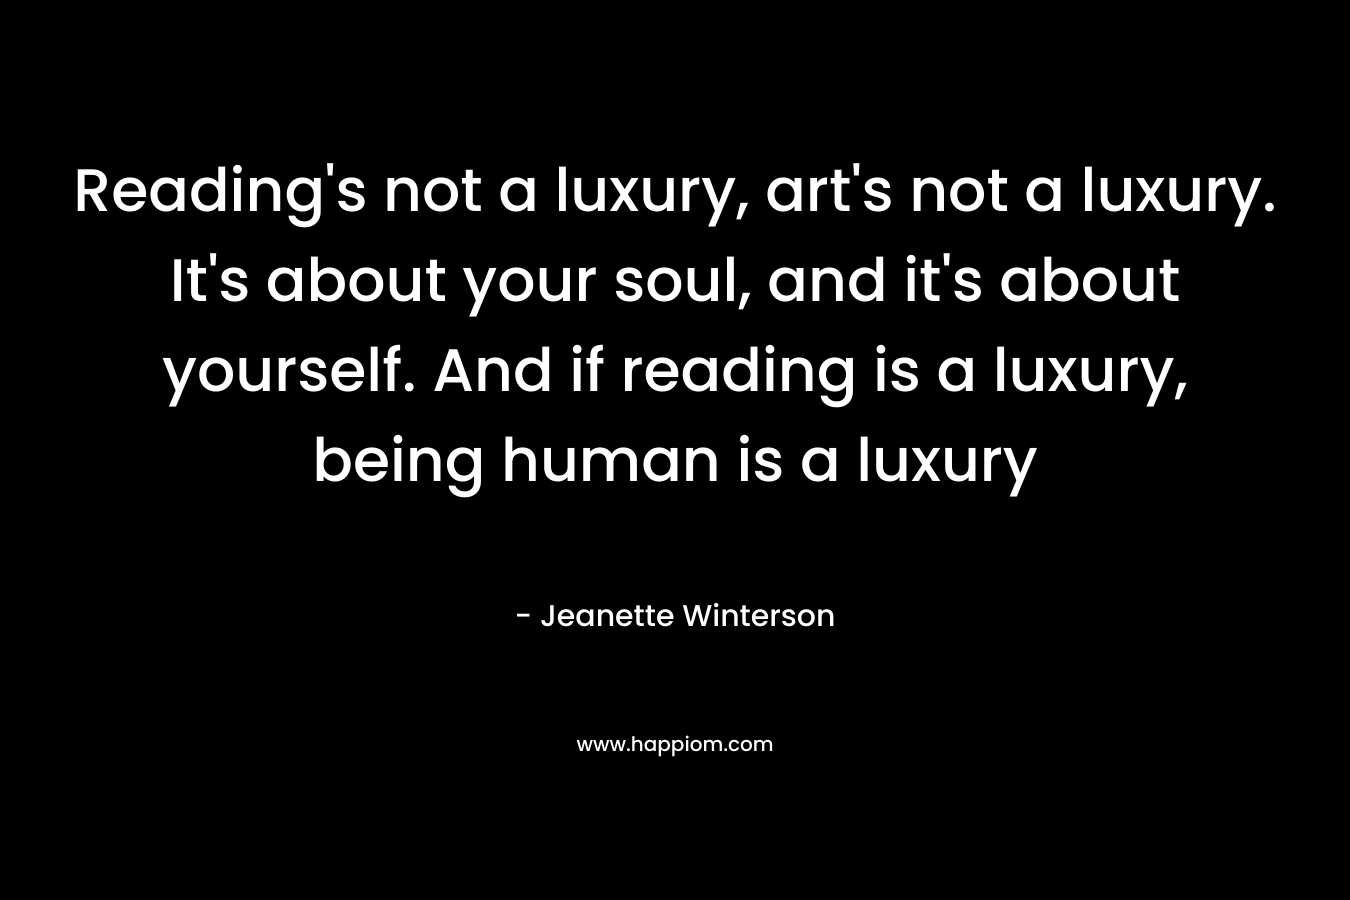 Reading’s not a luxury, art’s not a luxury. It’s about your soul, and it’s about yourself. And if reading is a luxury, being human is a luxury – Jeanette Winterson